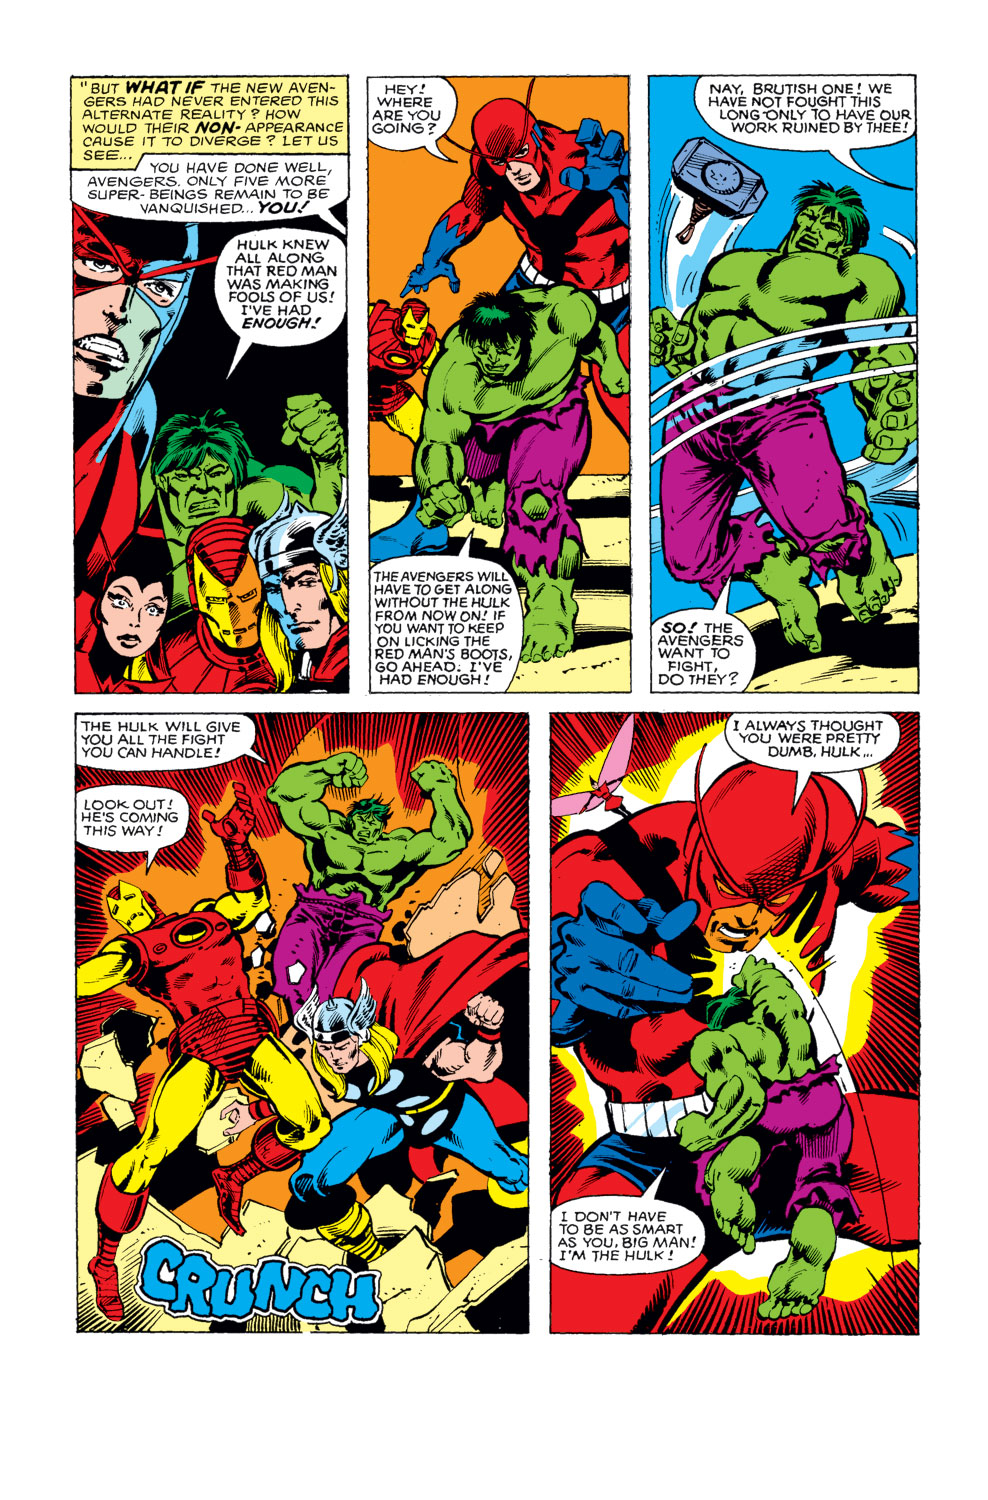 What If? (1977) issue 29 - The Avengers defeated everybody - Page 10